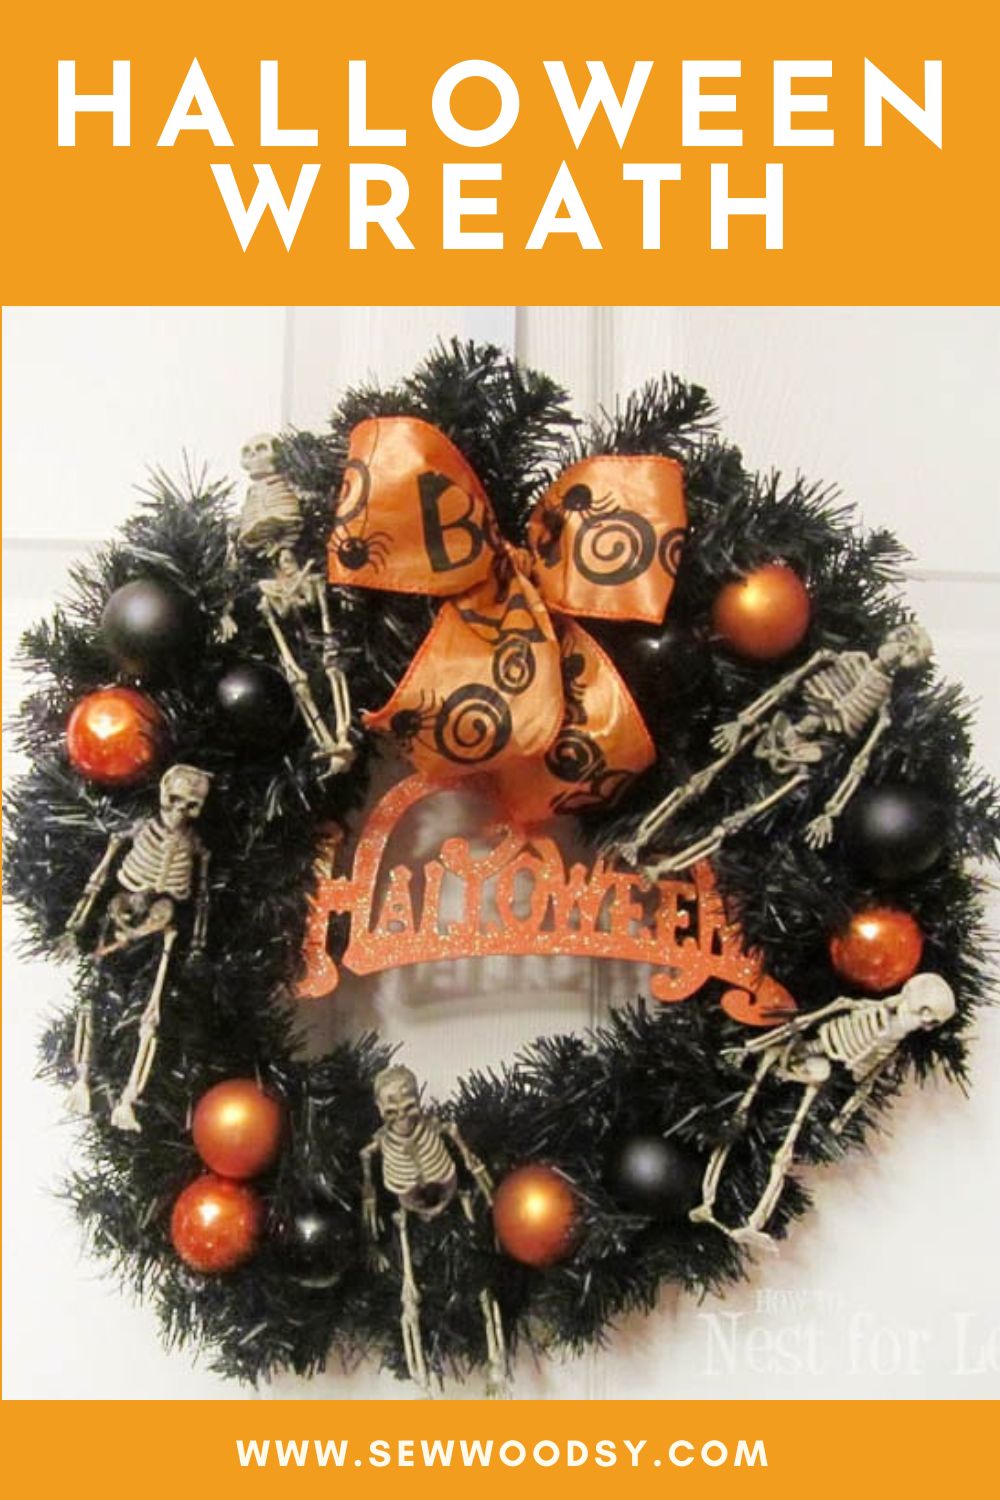 Black halloween wreath with skeletons and orange ribbon and ornaments with text on image for Pinterest.